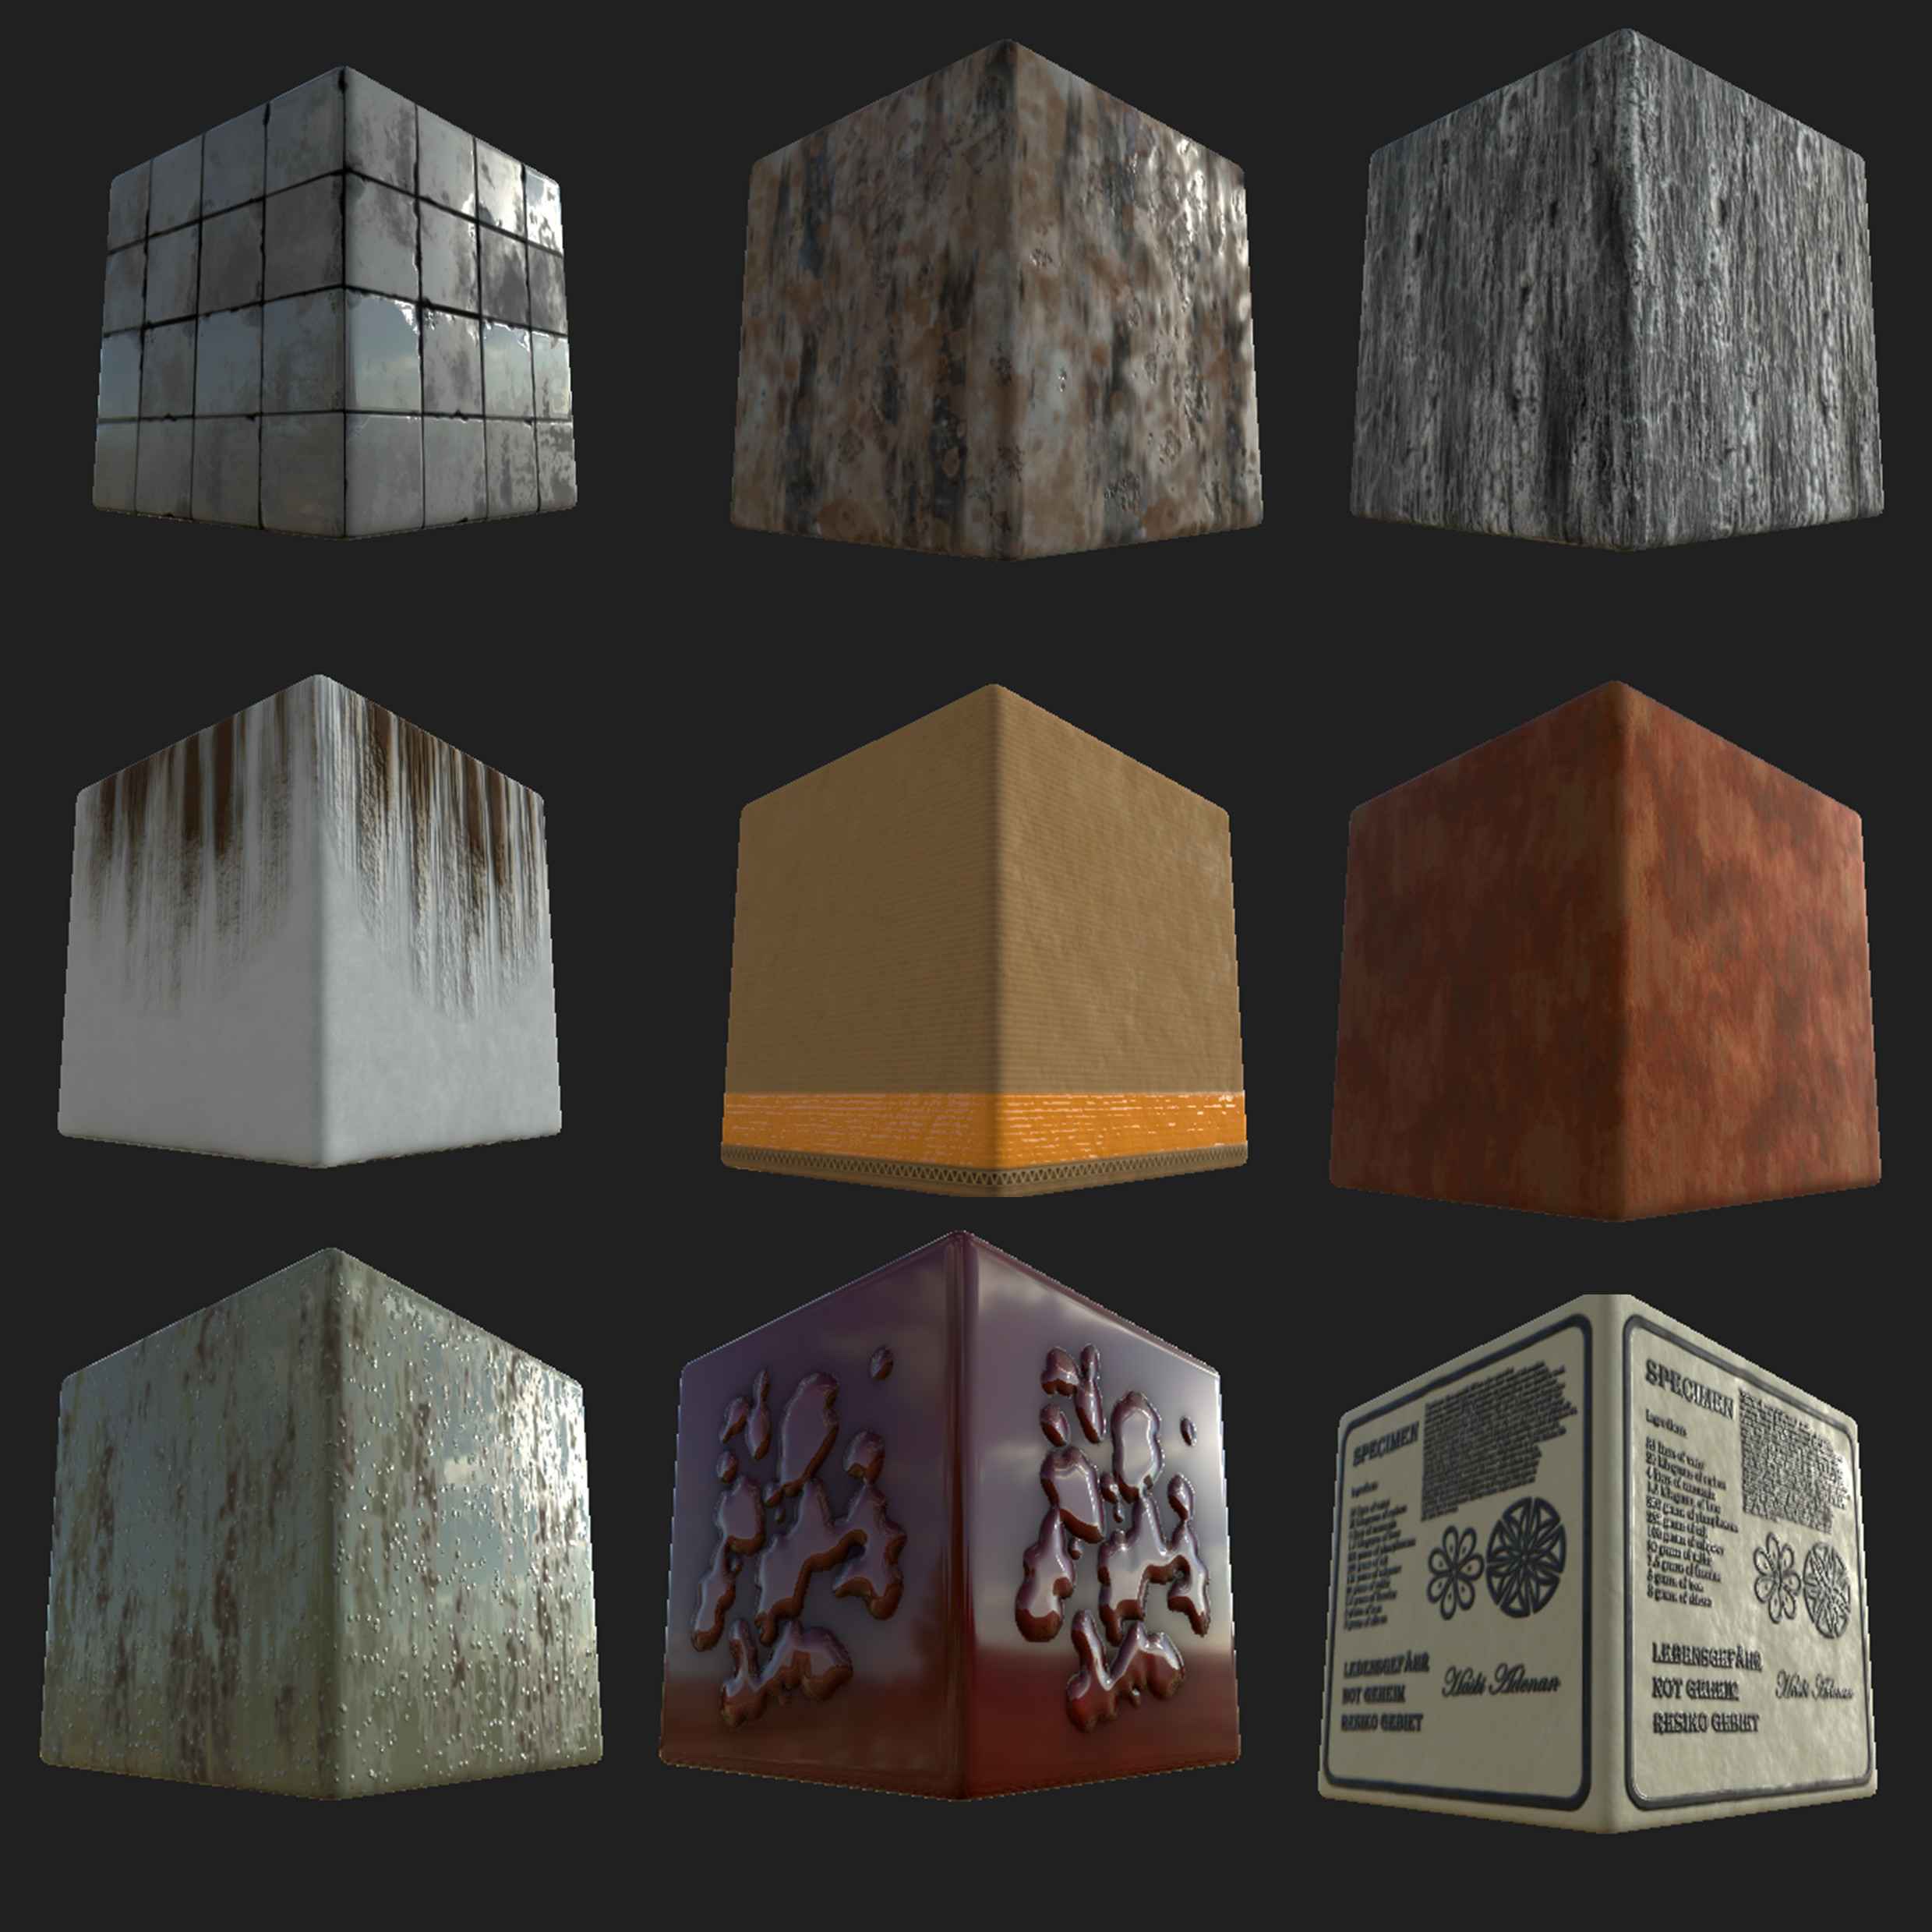 most of the texture that I made using substance